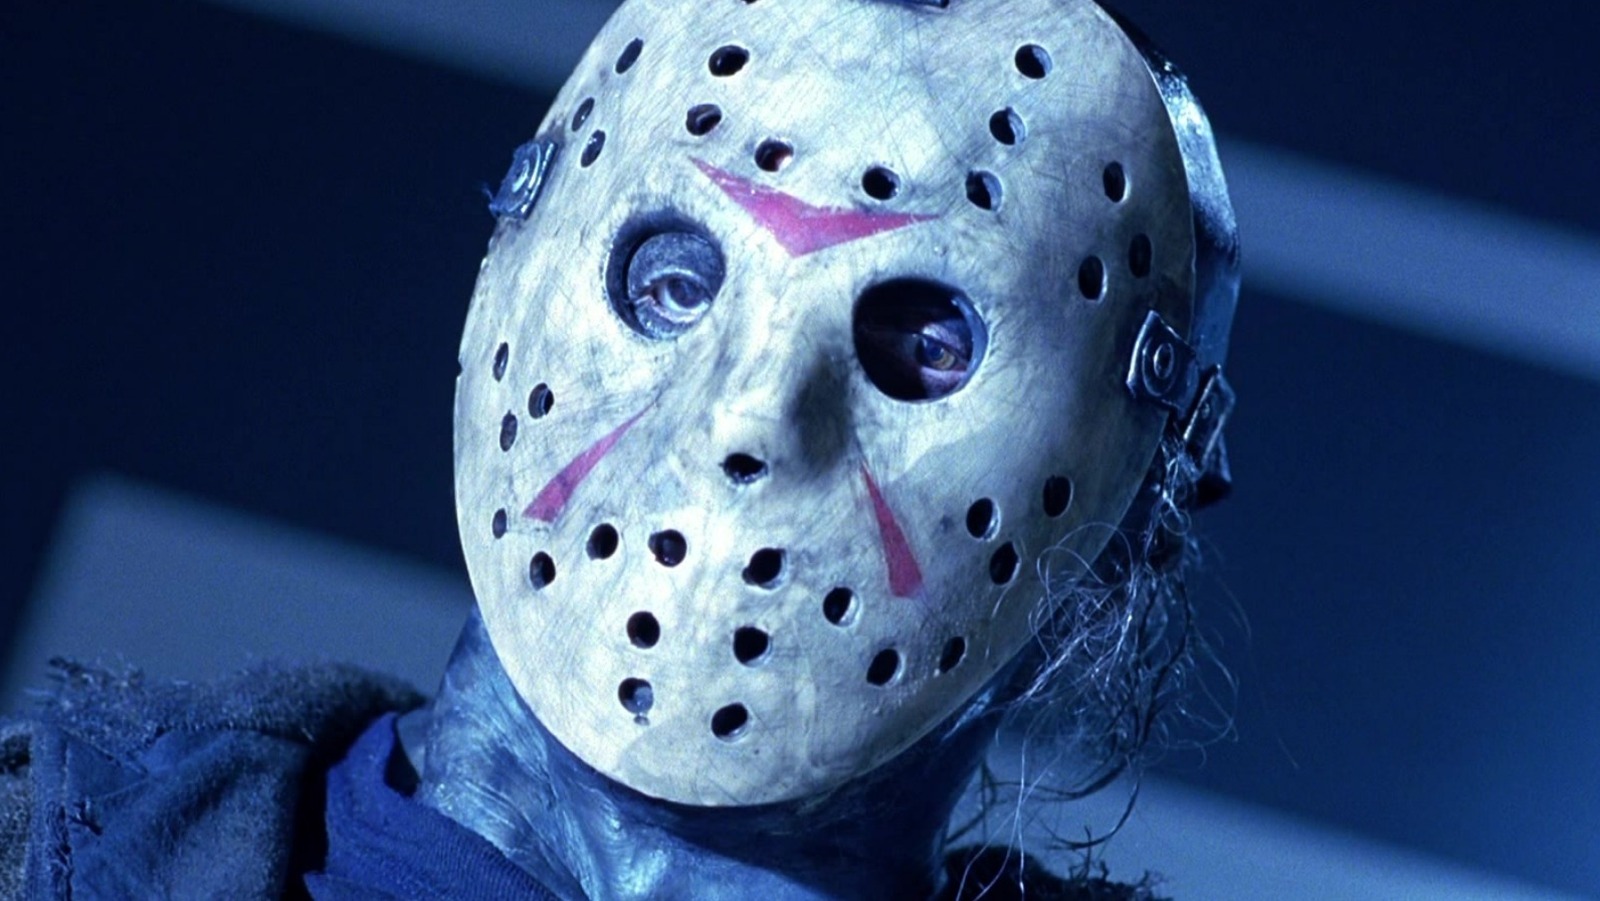 Fans Of Friday The 13th Just Got A Potential Tease Regarding The